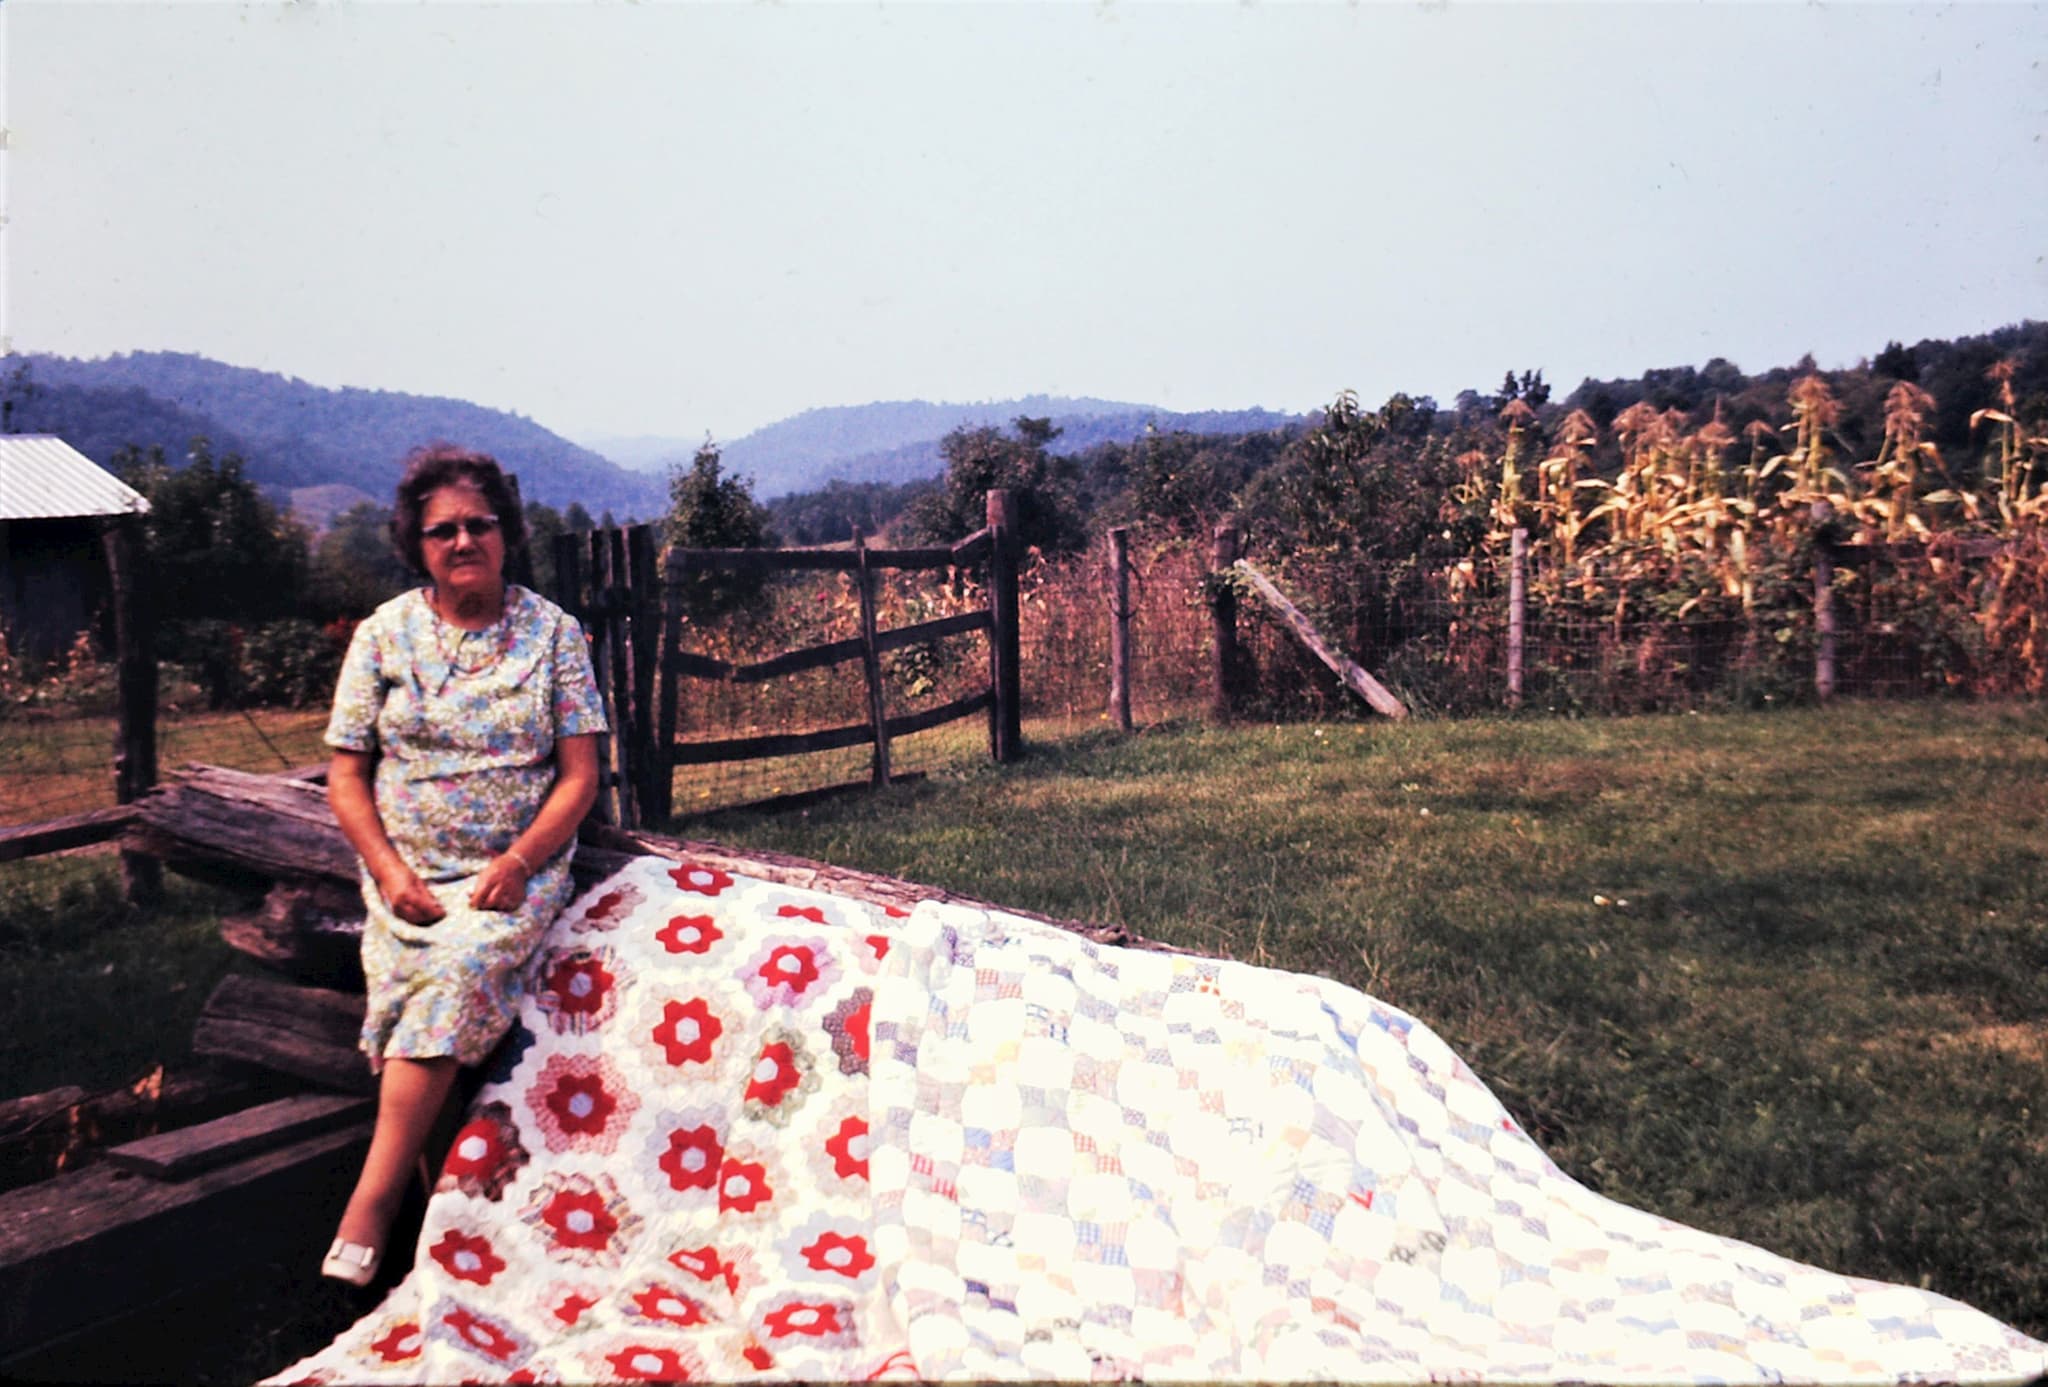 Islands in the Land Exhibition, Appalachia, West Virginia, Greenville, Mrs. Lillie Miller